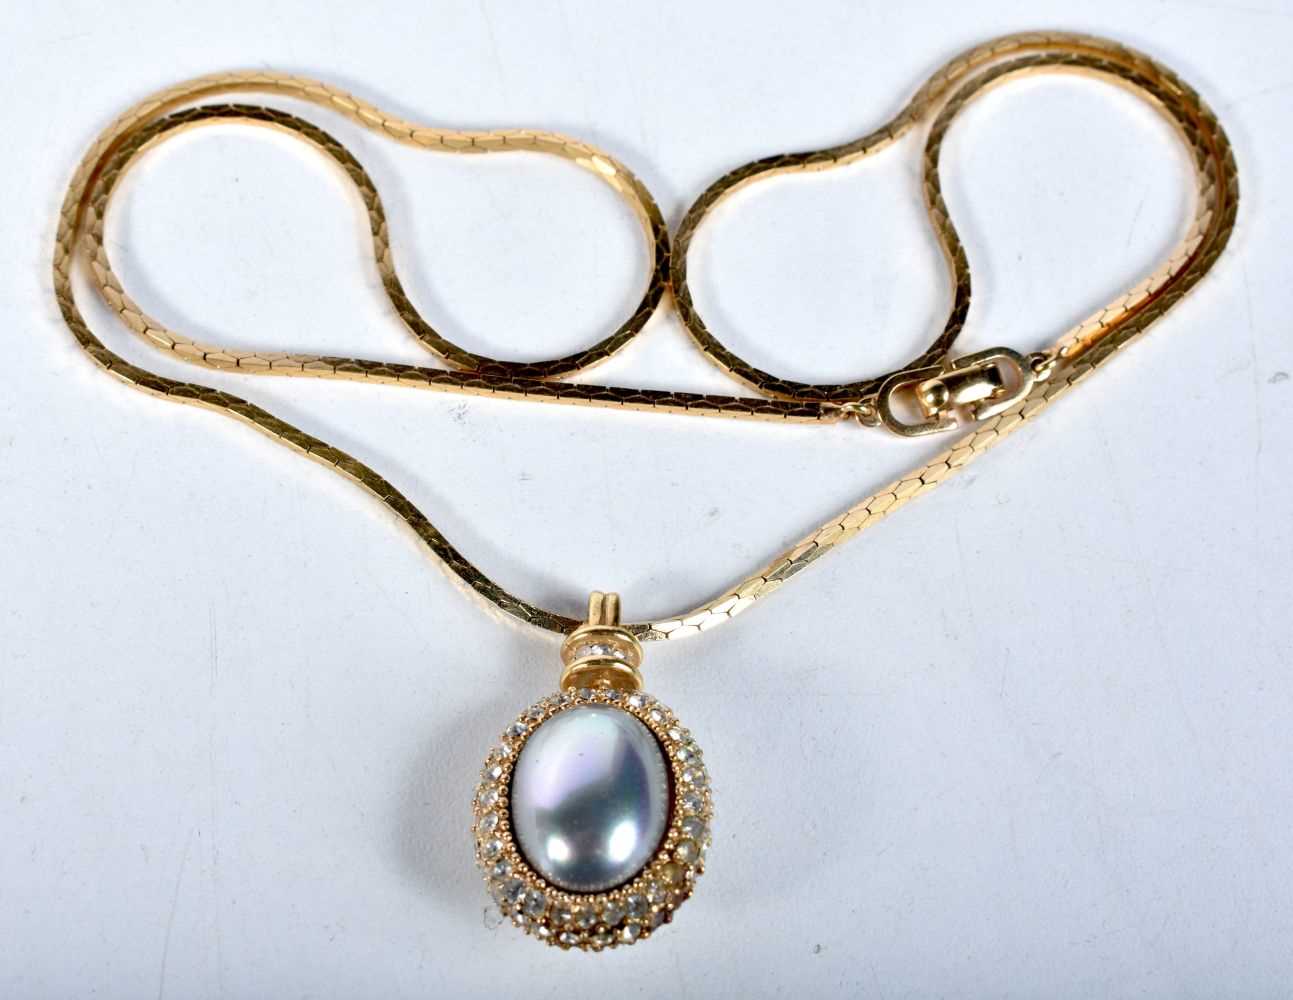 Gold tone necklace with simulated pearl pendant by designer Christian Dior. Stamped Dior. Chain 60cm